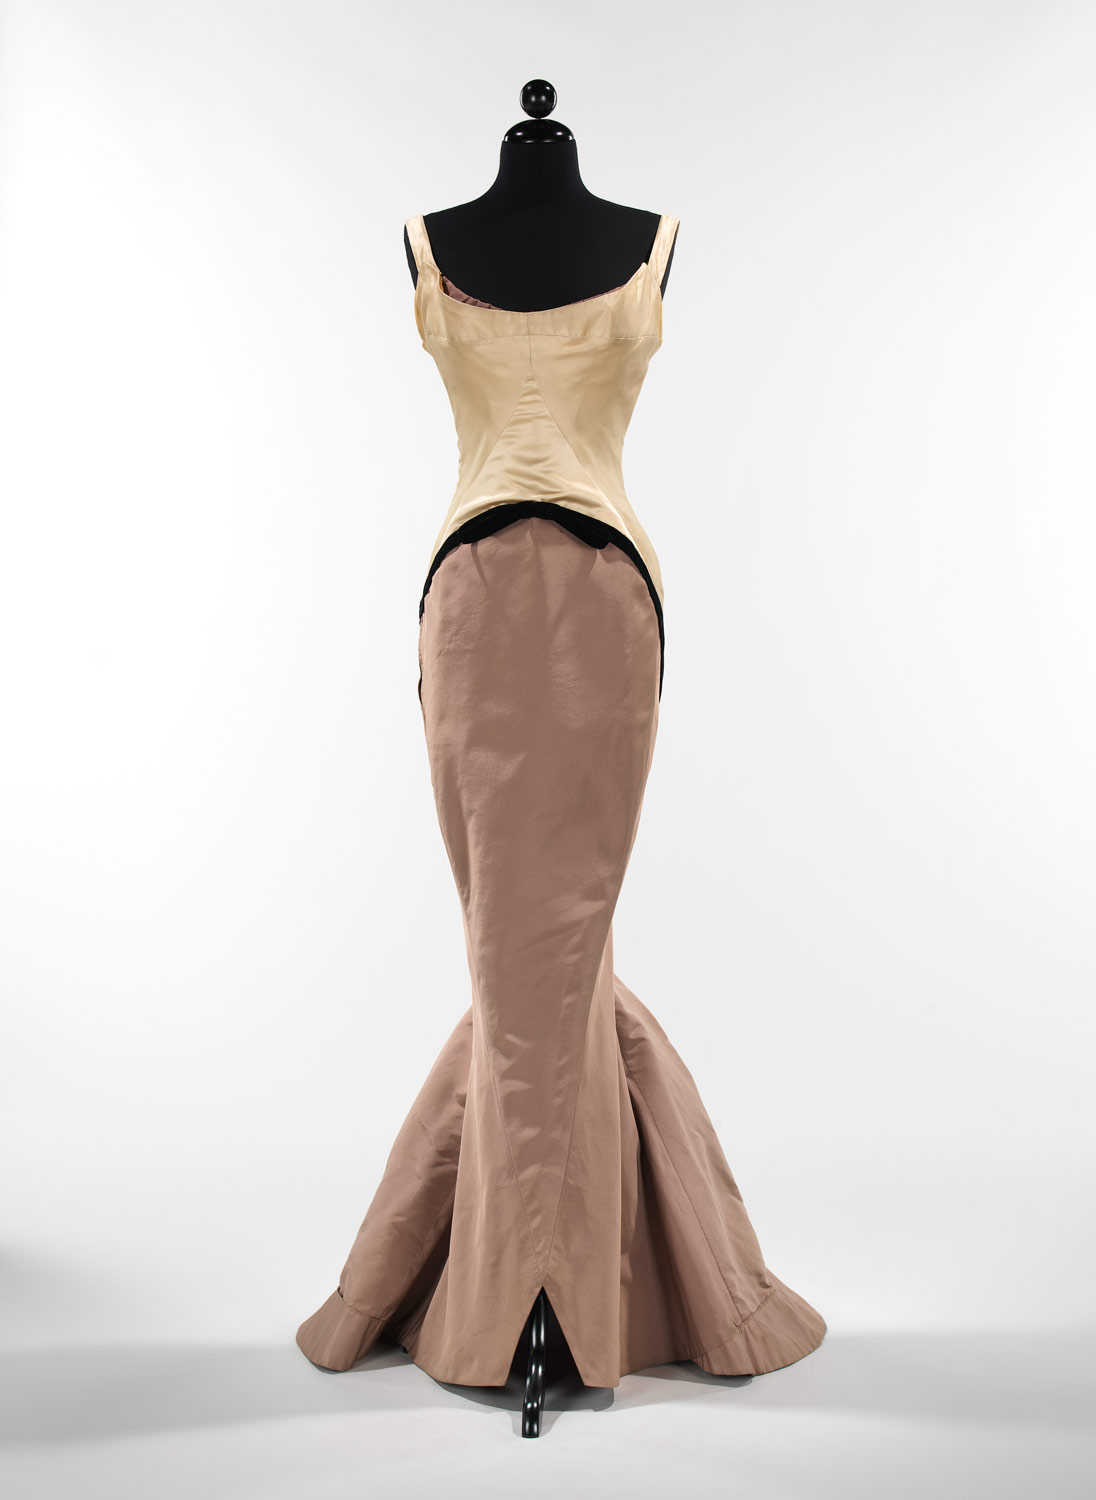 59.39 0004 Working Title/Artist: Charles James: Evening DressDepartment: Costume InstituteCulture/Period/Location: HB/TOA Date Code: Working Date: photography by mma, Digital File "59.39_front_CP3.tif" retouched by film and media (jnc) 2_28_12